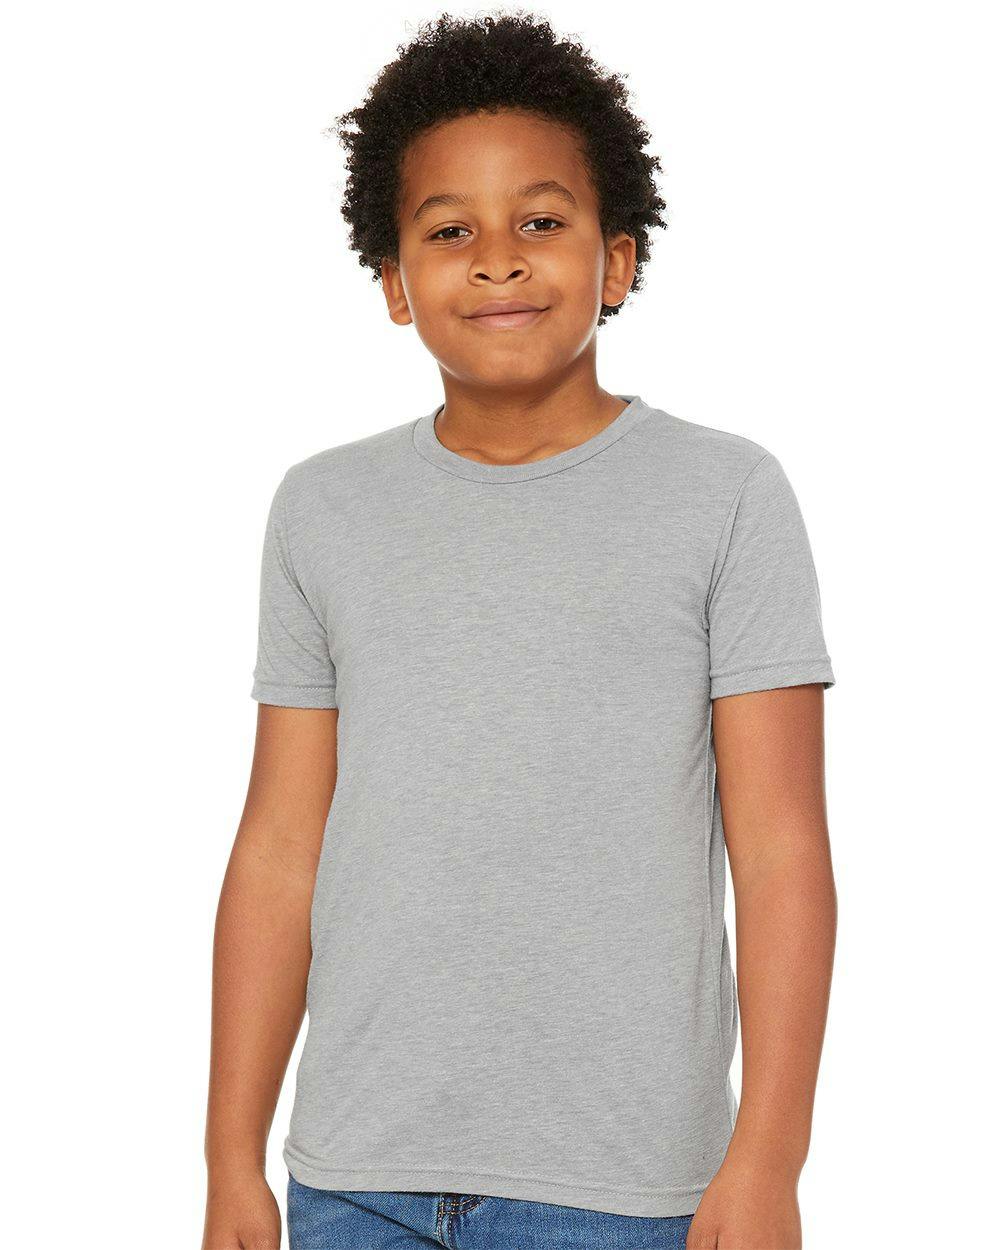 Image for Youth Triblend Tee - 3413Y